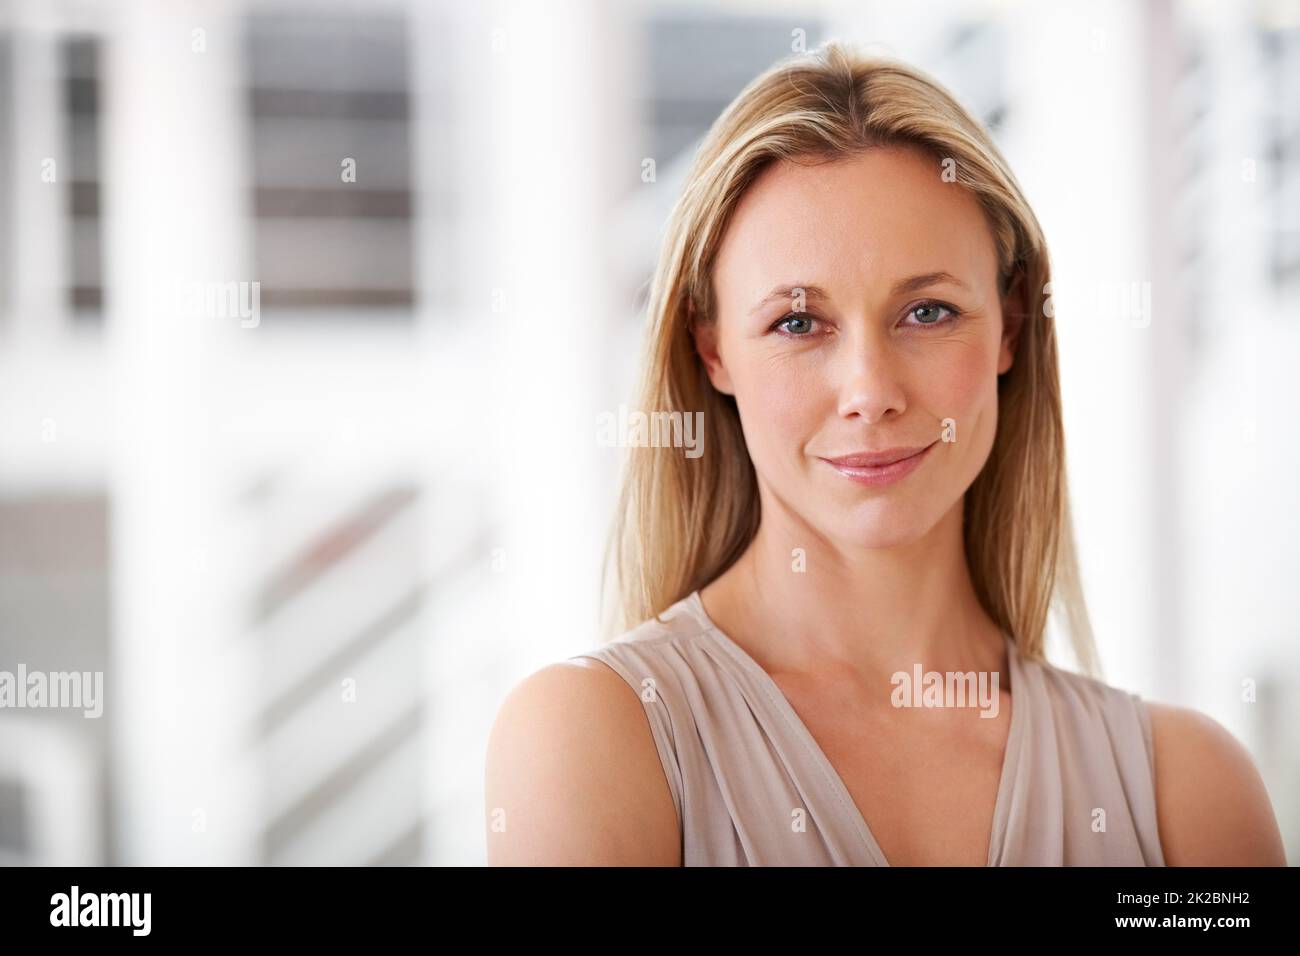 Innovative and ambitious. Portrait of an ambitious businesswoman standing in the office. Stock Photo